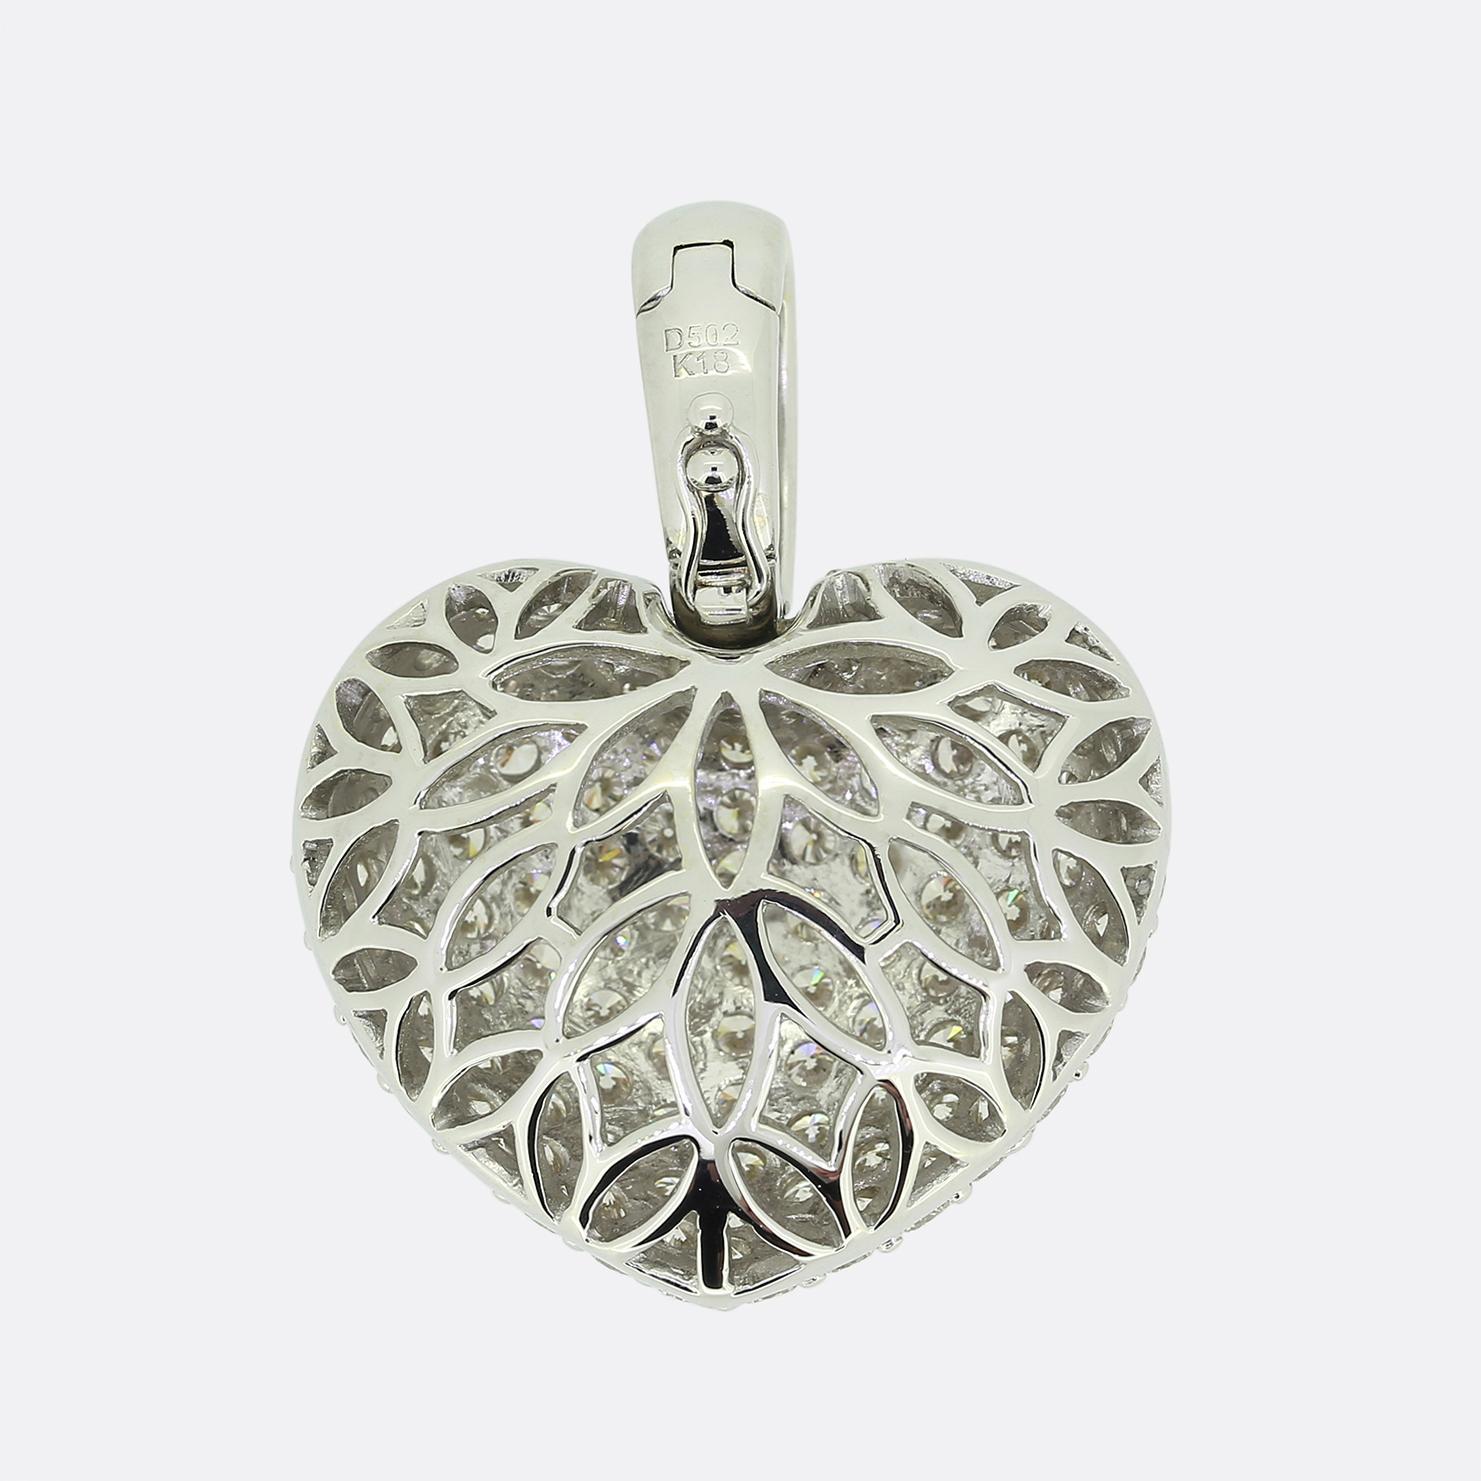 This is a wonderful contemporary diamond heart pendant. The heart has been pave set with 5.02 carats of round brilliant cut diamonds and crafted in 18ct white gold with an openwork back. 

Condition: Used (Excellent)
Weight: 13.6 grams
Pendant